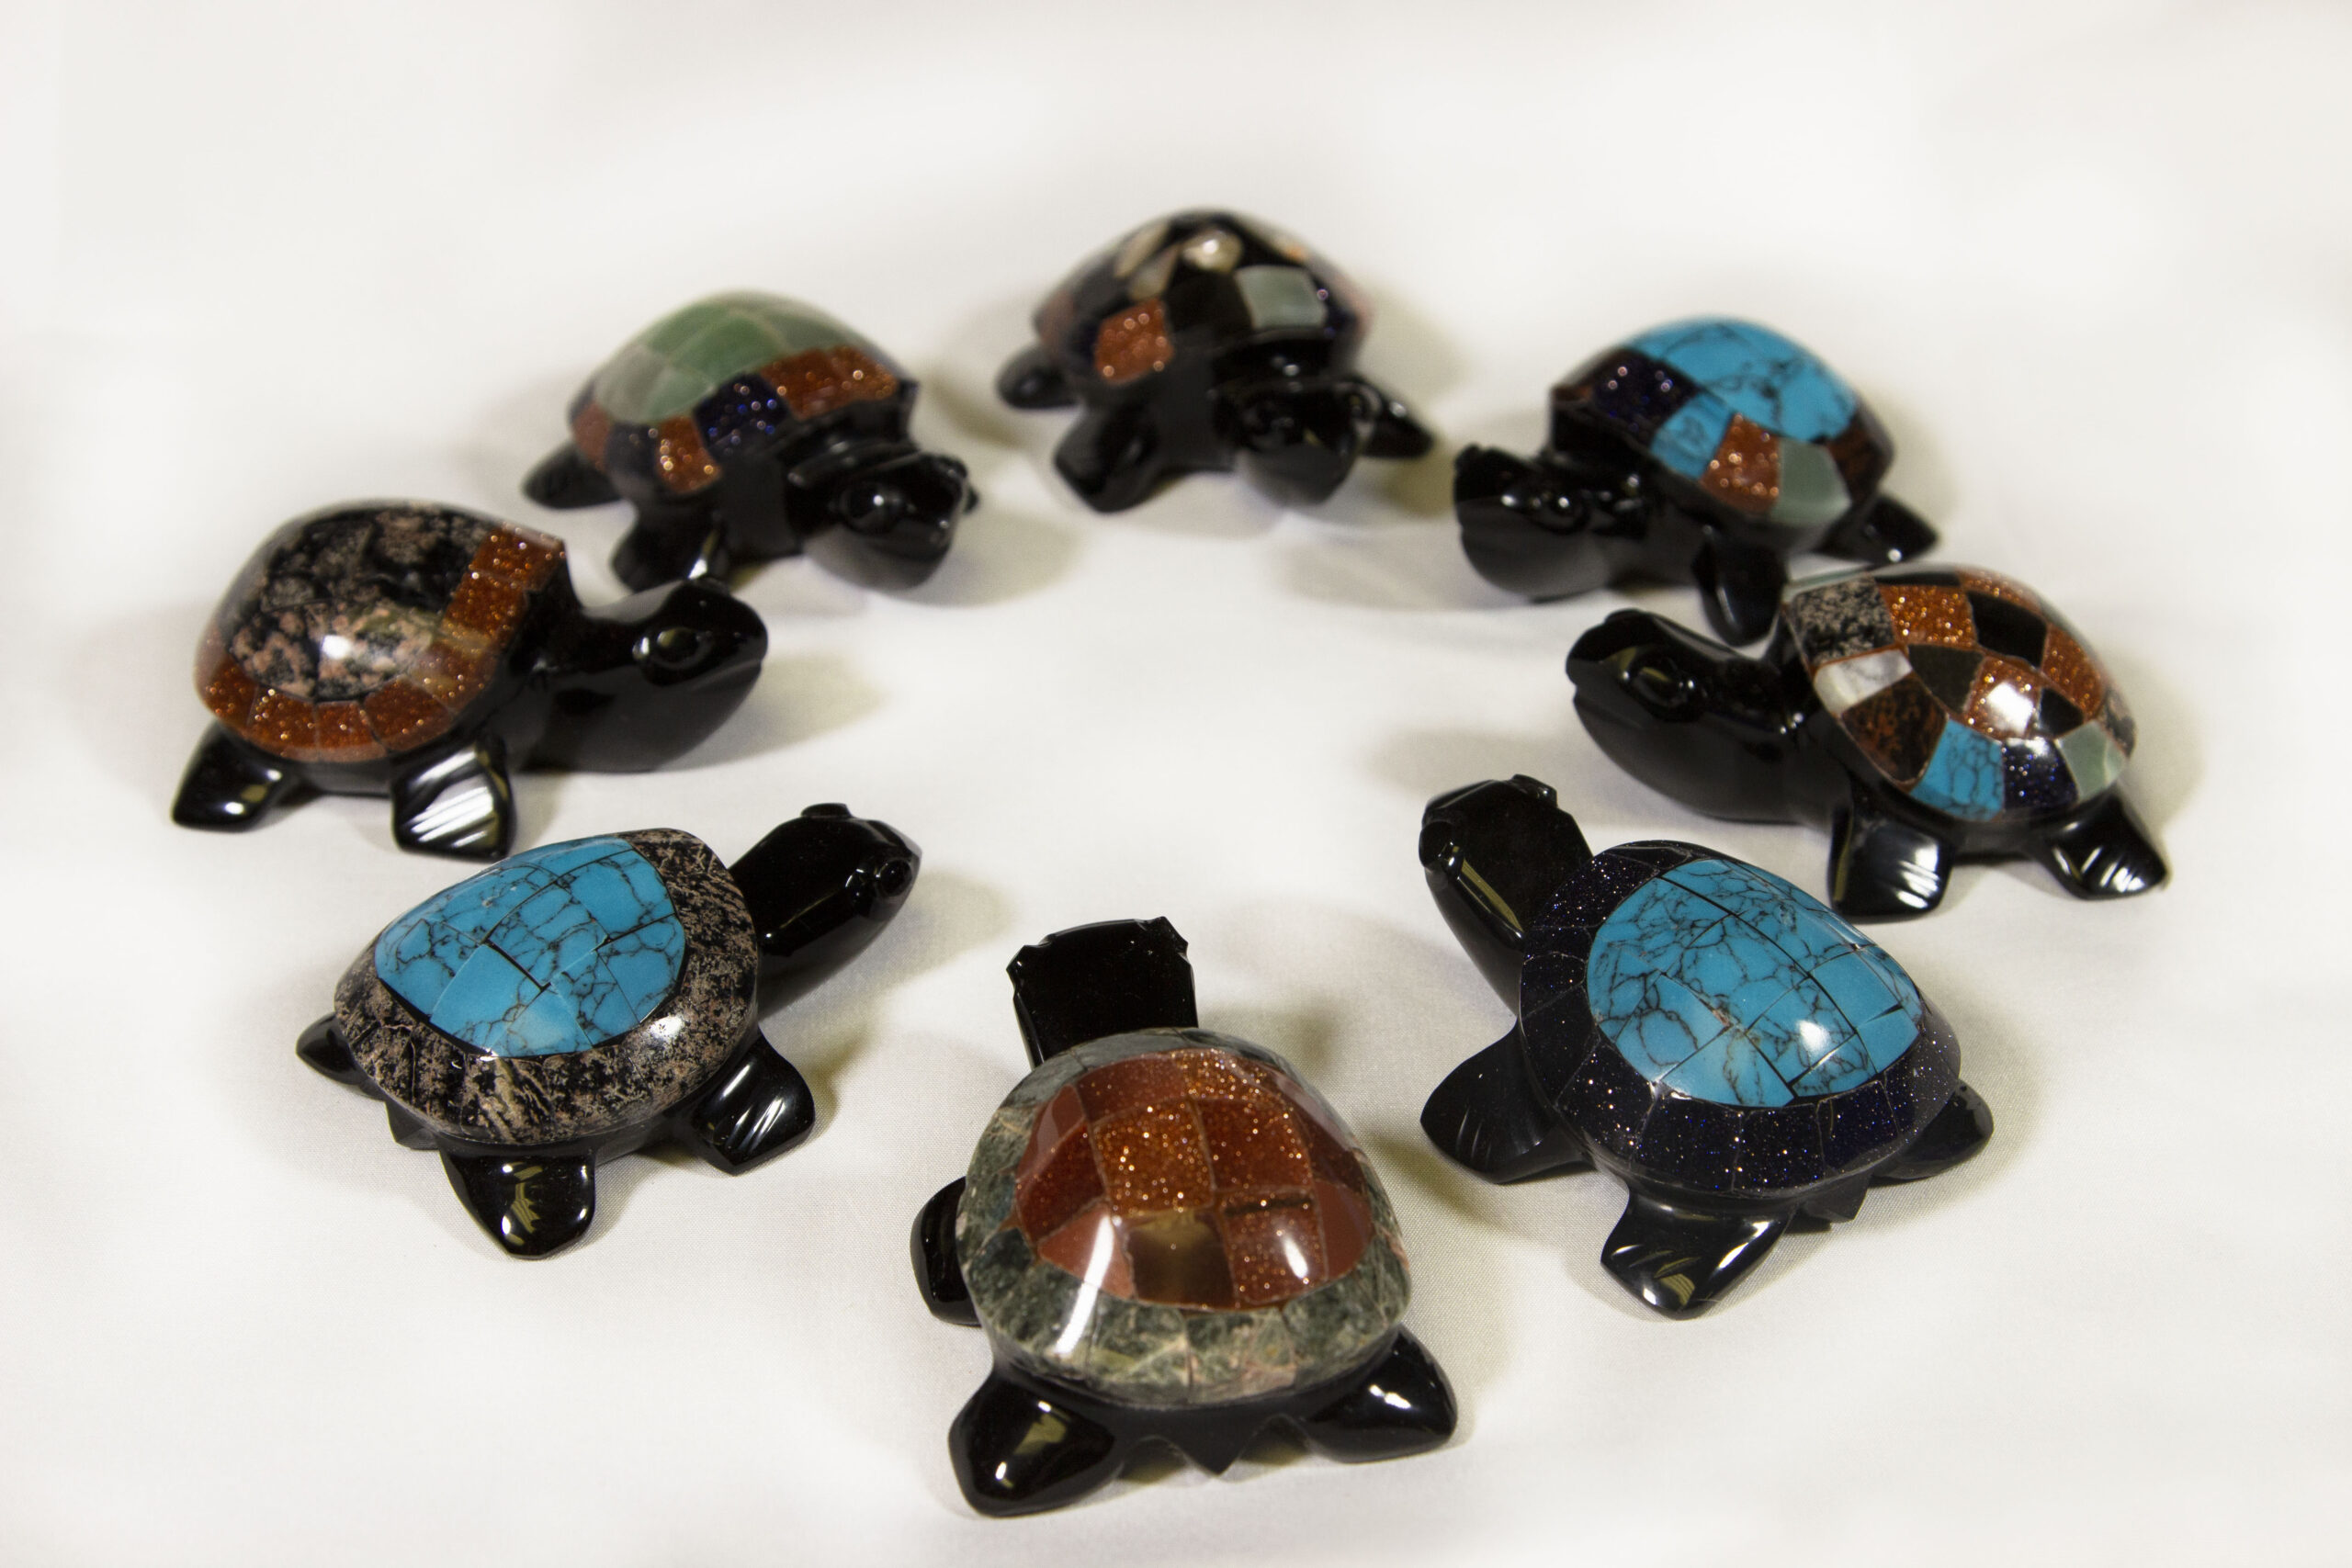 Eight small black decorative turtles with assorted colored shells